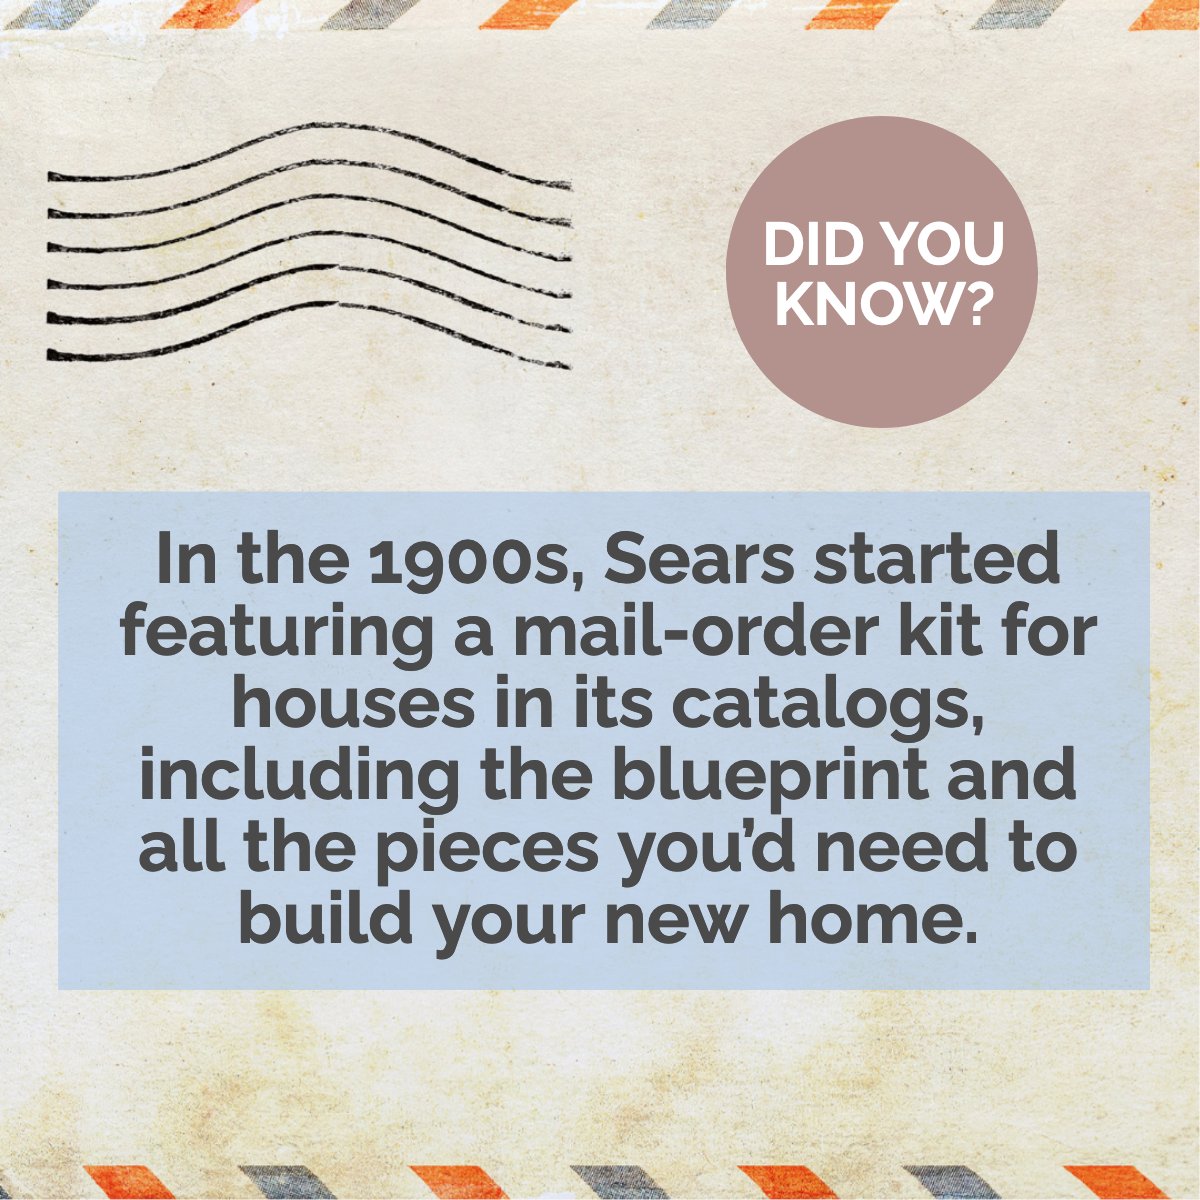 Did you know?

The house that came in the mail.
✉️📬🏡

#didyouknow   #fact   #1900s    #mail   #goodtoknow   #randomfact   #realestate   #realestate101
#TownsendTeam #iloverealestate #Toronto #Vaughan #Mississauga #Brampton #Caledon #TorontoLife #Tdot #905